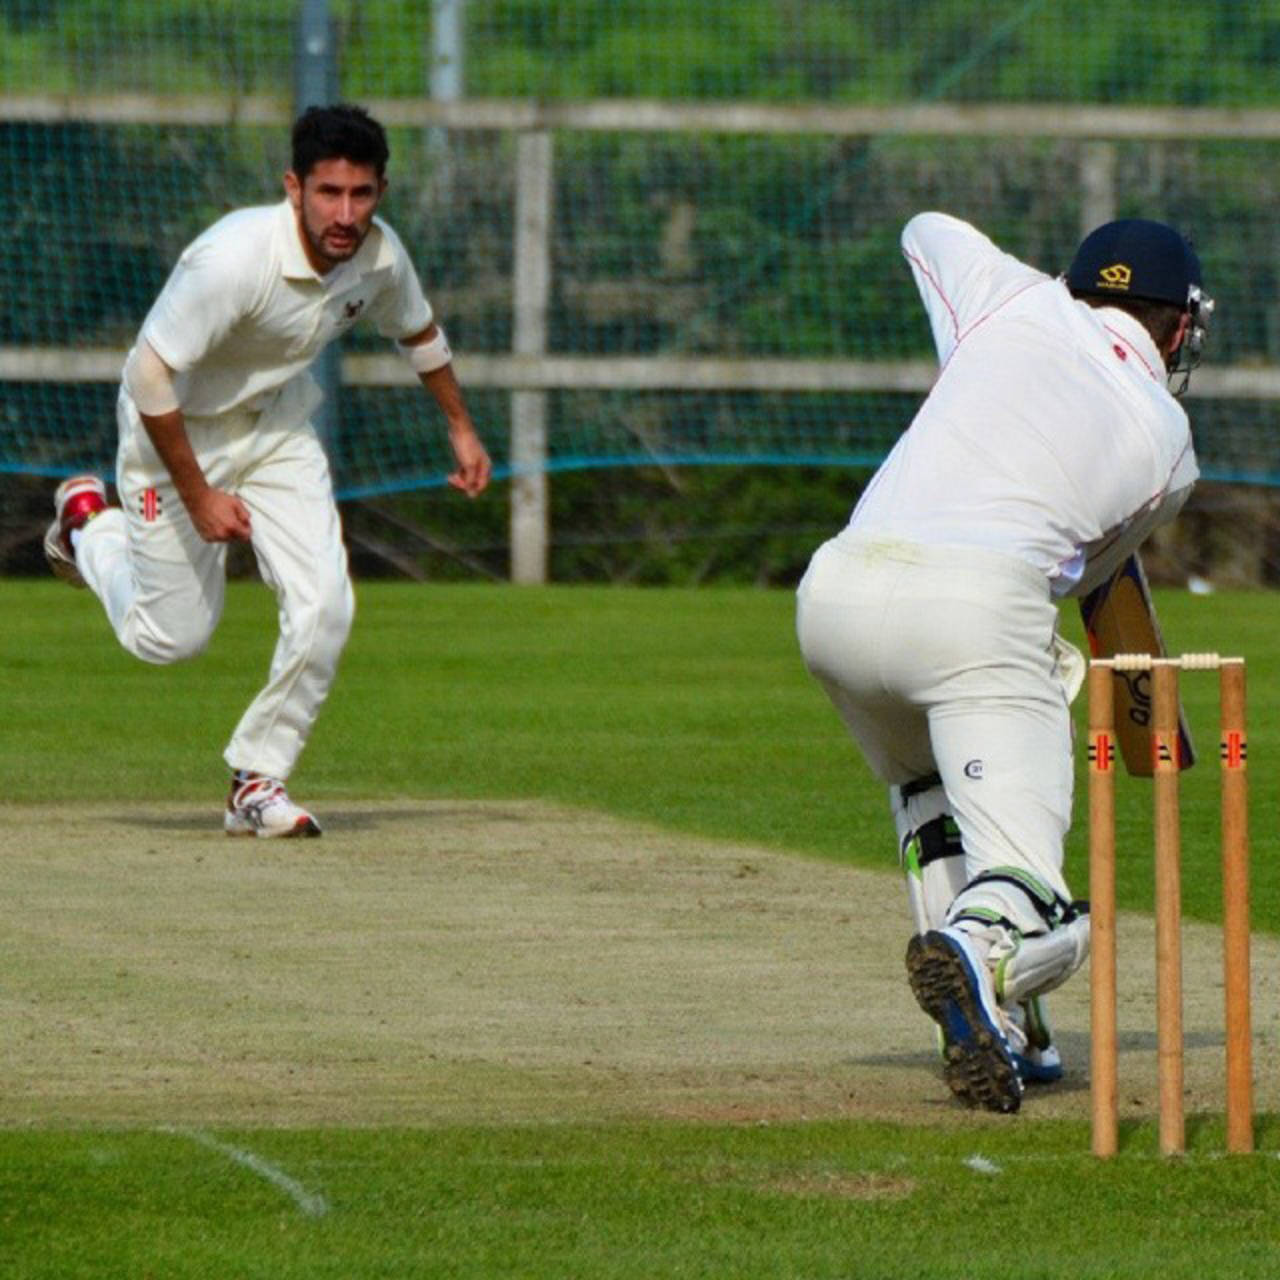 The author turns out for Tynedale CC in Hexham, Northumberland